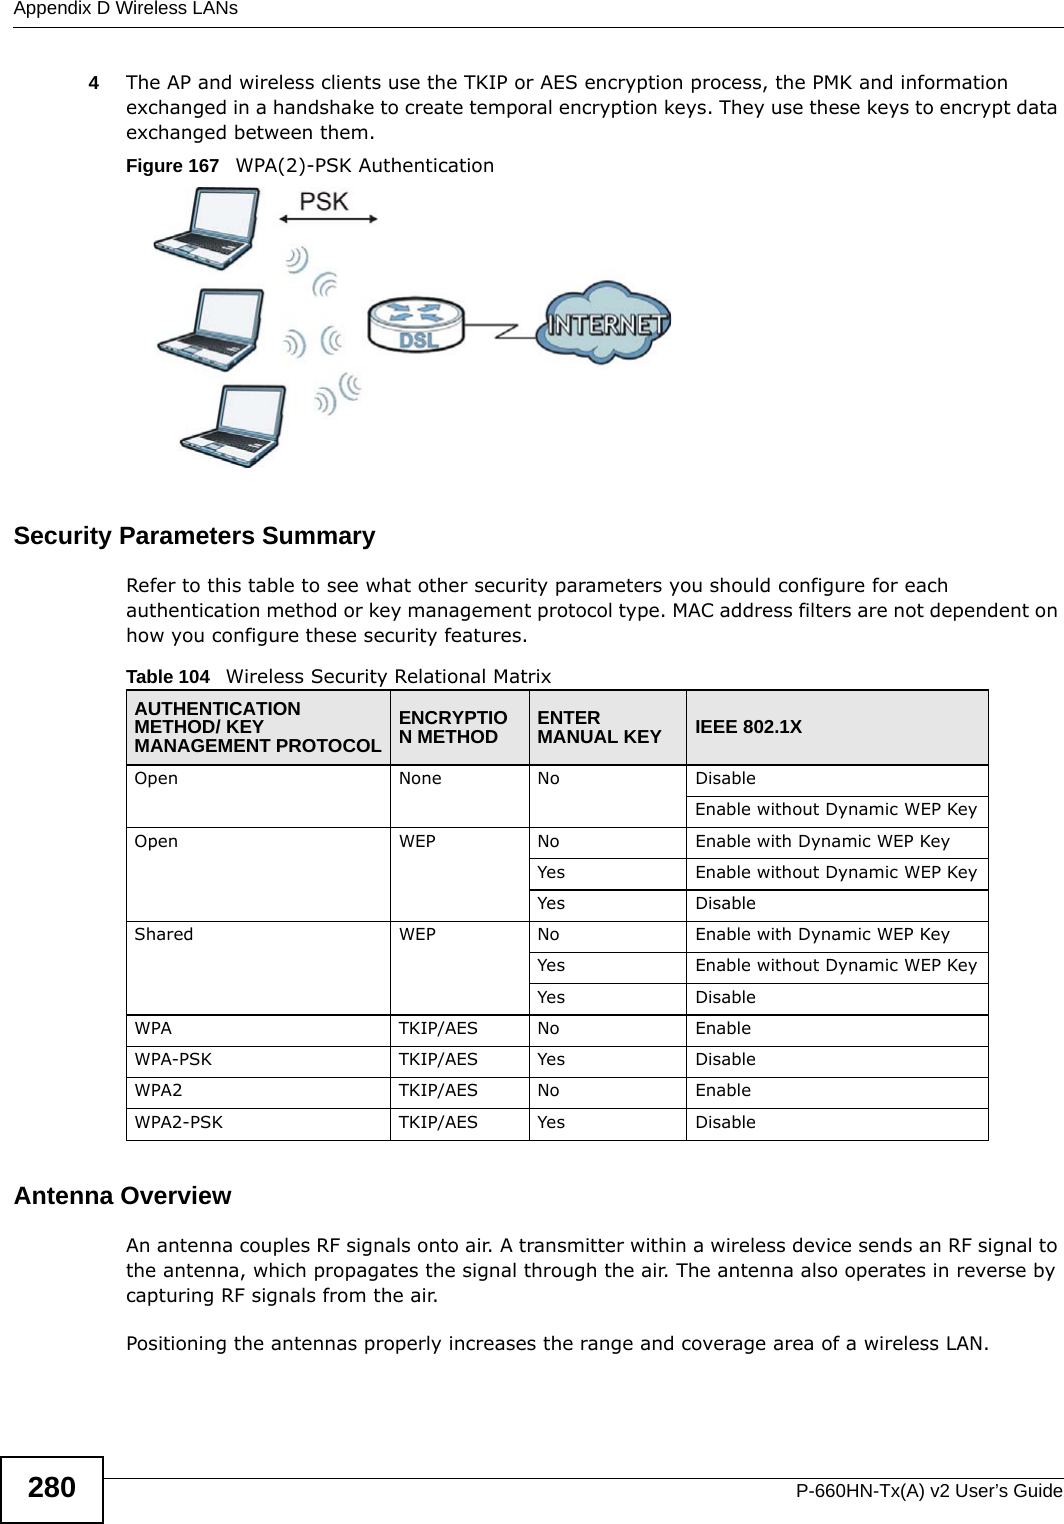 Appendix D Wireless LANsP-660HN-Tx(A) v2 User’s Guide2804The AP and wireless clients use the TKIP or AES encryption process, the PMK and information exchanged in a handshake to create temporal encryption keys. They use these keys to encrypt data exchanged between them.Figure 167   WPA(2)-PSK AuthenticationSecurity Parameters SummaryRefer to this table to see what other security parameters you should configure for each authentication method or key management protocol type. MAC address filters are not dependent on how you configure these security features.Antenna OverviewAn antenna couples RF signals onto air. A transmitter within a wireless device sends an RF signal to the antenna, which propagates the signal through the air. The antenna also operates in reverse by capturing RF signals from the air. Positioning the antennas properly increases the range and coverage area of a wireless LAN. Table 104   Wireless Security Relational MatrixAUTHENTICATION METHOD/ KEY MANAGEMENT PROTOCOLENCRYPTION METHOD ENTER MANUAL KEY IEEE 802.1XOpen None No DisableEnable without Dynamic WEP KeyOpen WEP No           Enable with Dynamic WEP KeyYes Enable without Dynamic WEP KeyYes DisableShared WEP  No           Enable with Dynamic WEP KeyYes Enable without Dynamic WEP KeyYes DisableWPA  TKIP/AES No EnableWPA-PSK  TKIP/AES Yes DisableWPA2 TKIP/AES No EnableWPA2-PSK  TKIP/AES Yes Disable